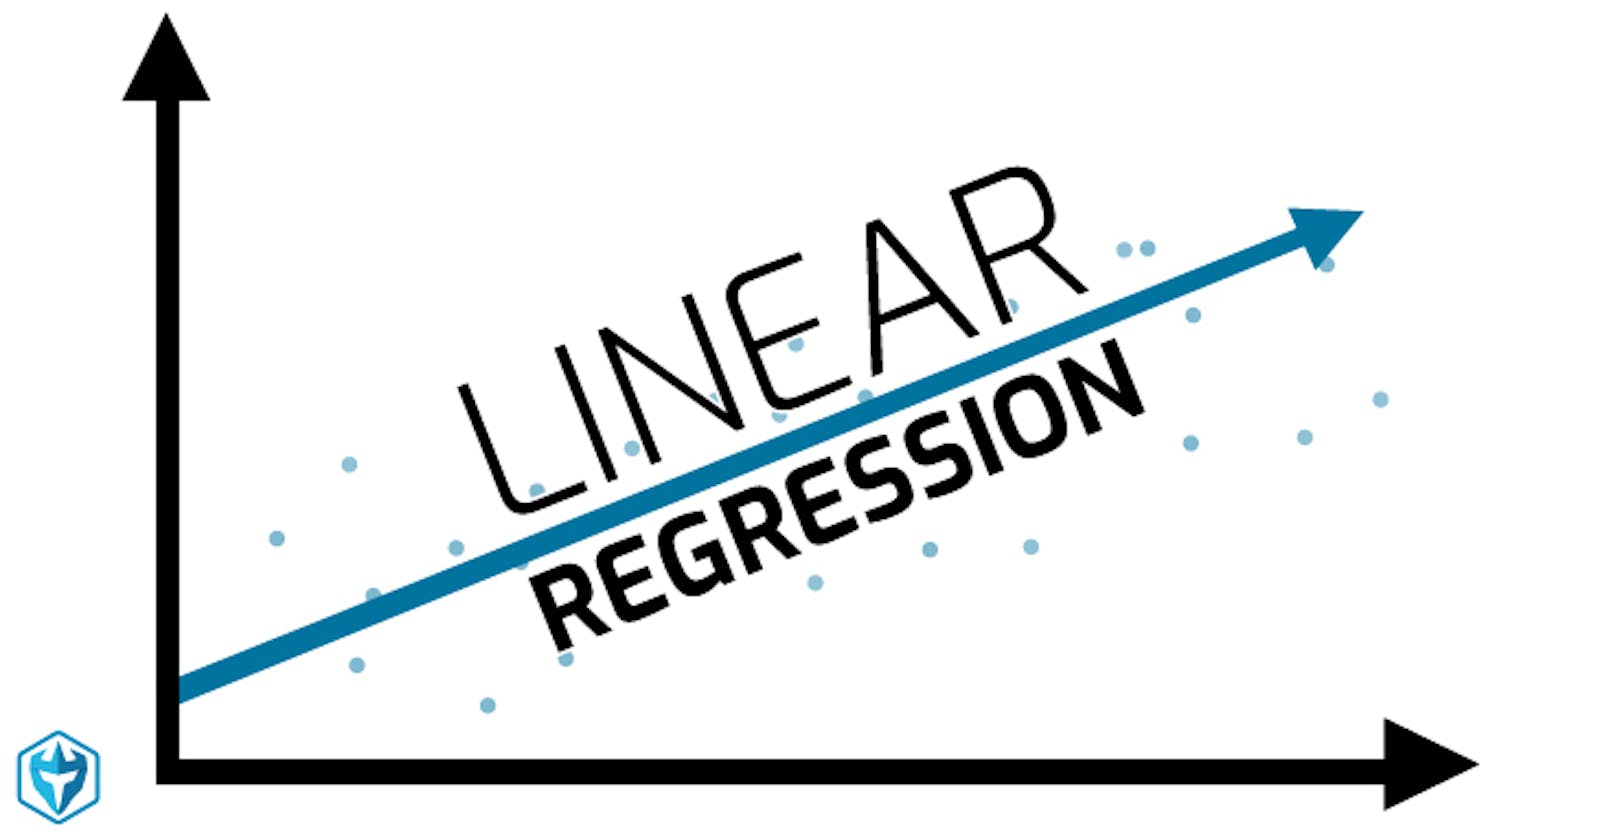 Let's code Linear Regression.